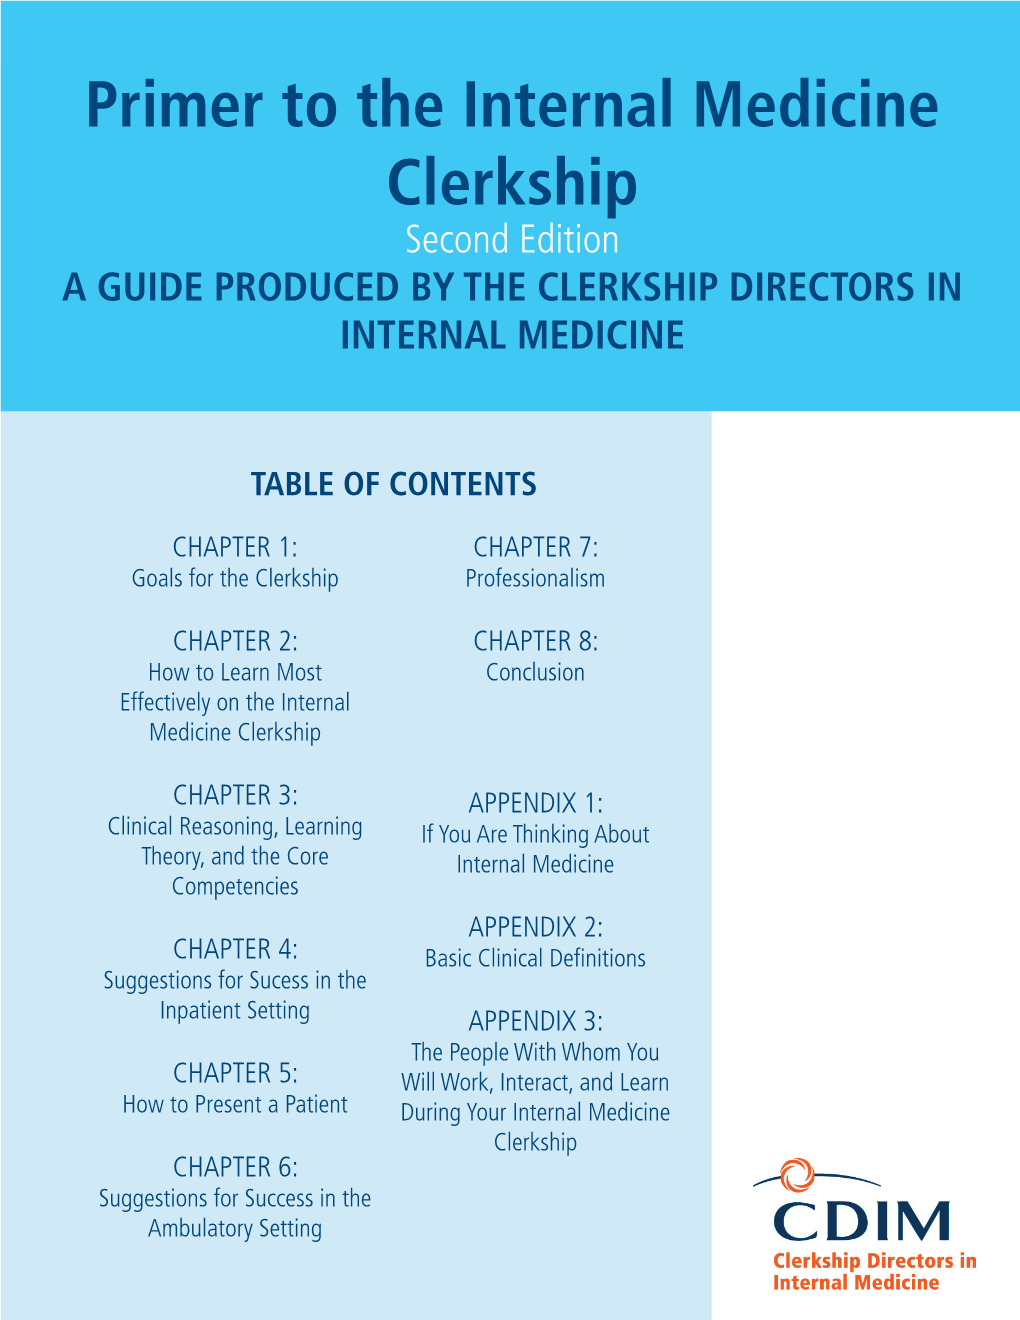 Primer to the Internal Medicine Clerkship Second Edition a GUIDE PRODUCED by the CLERKSHIP DIRECTORS in INTERNAL MEDICINE